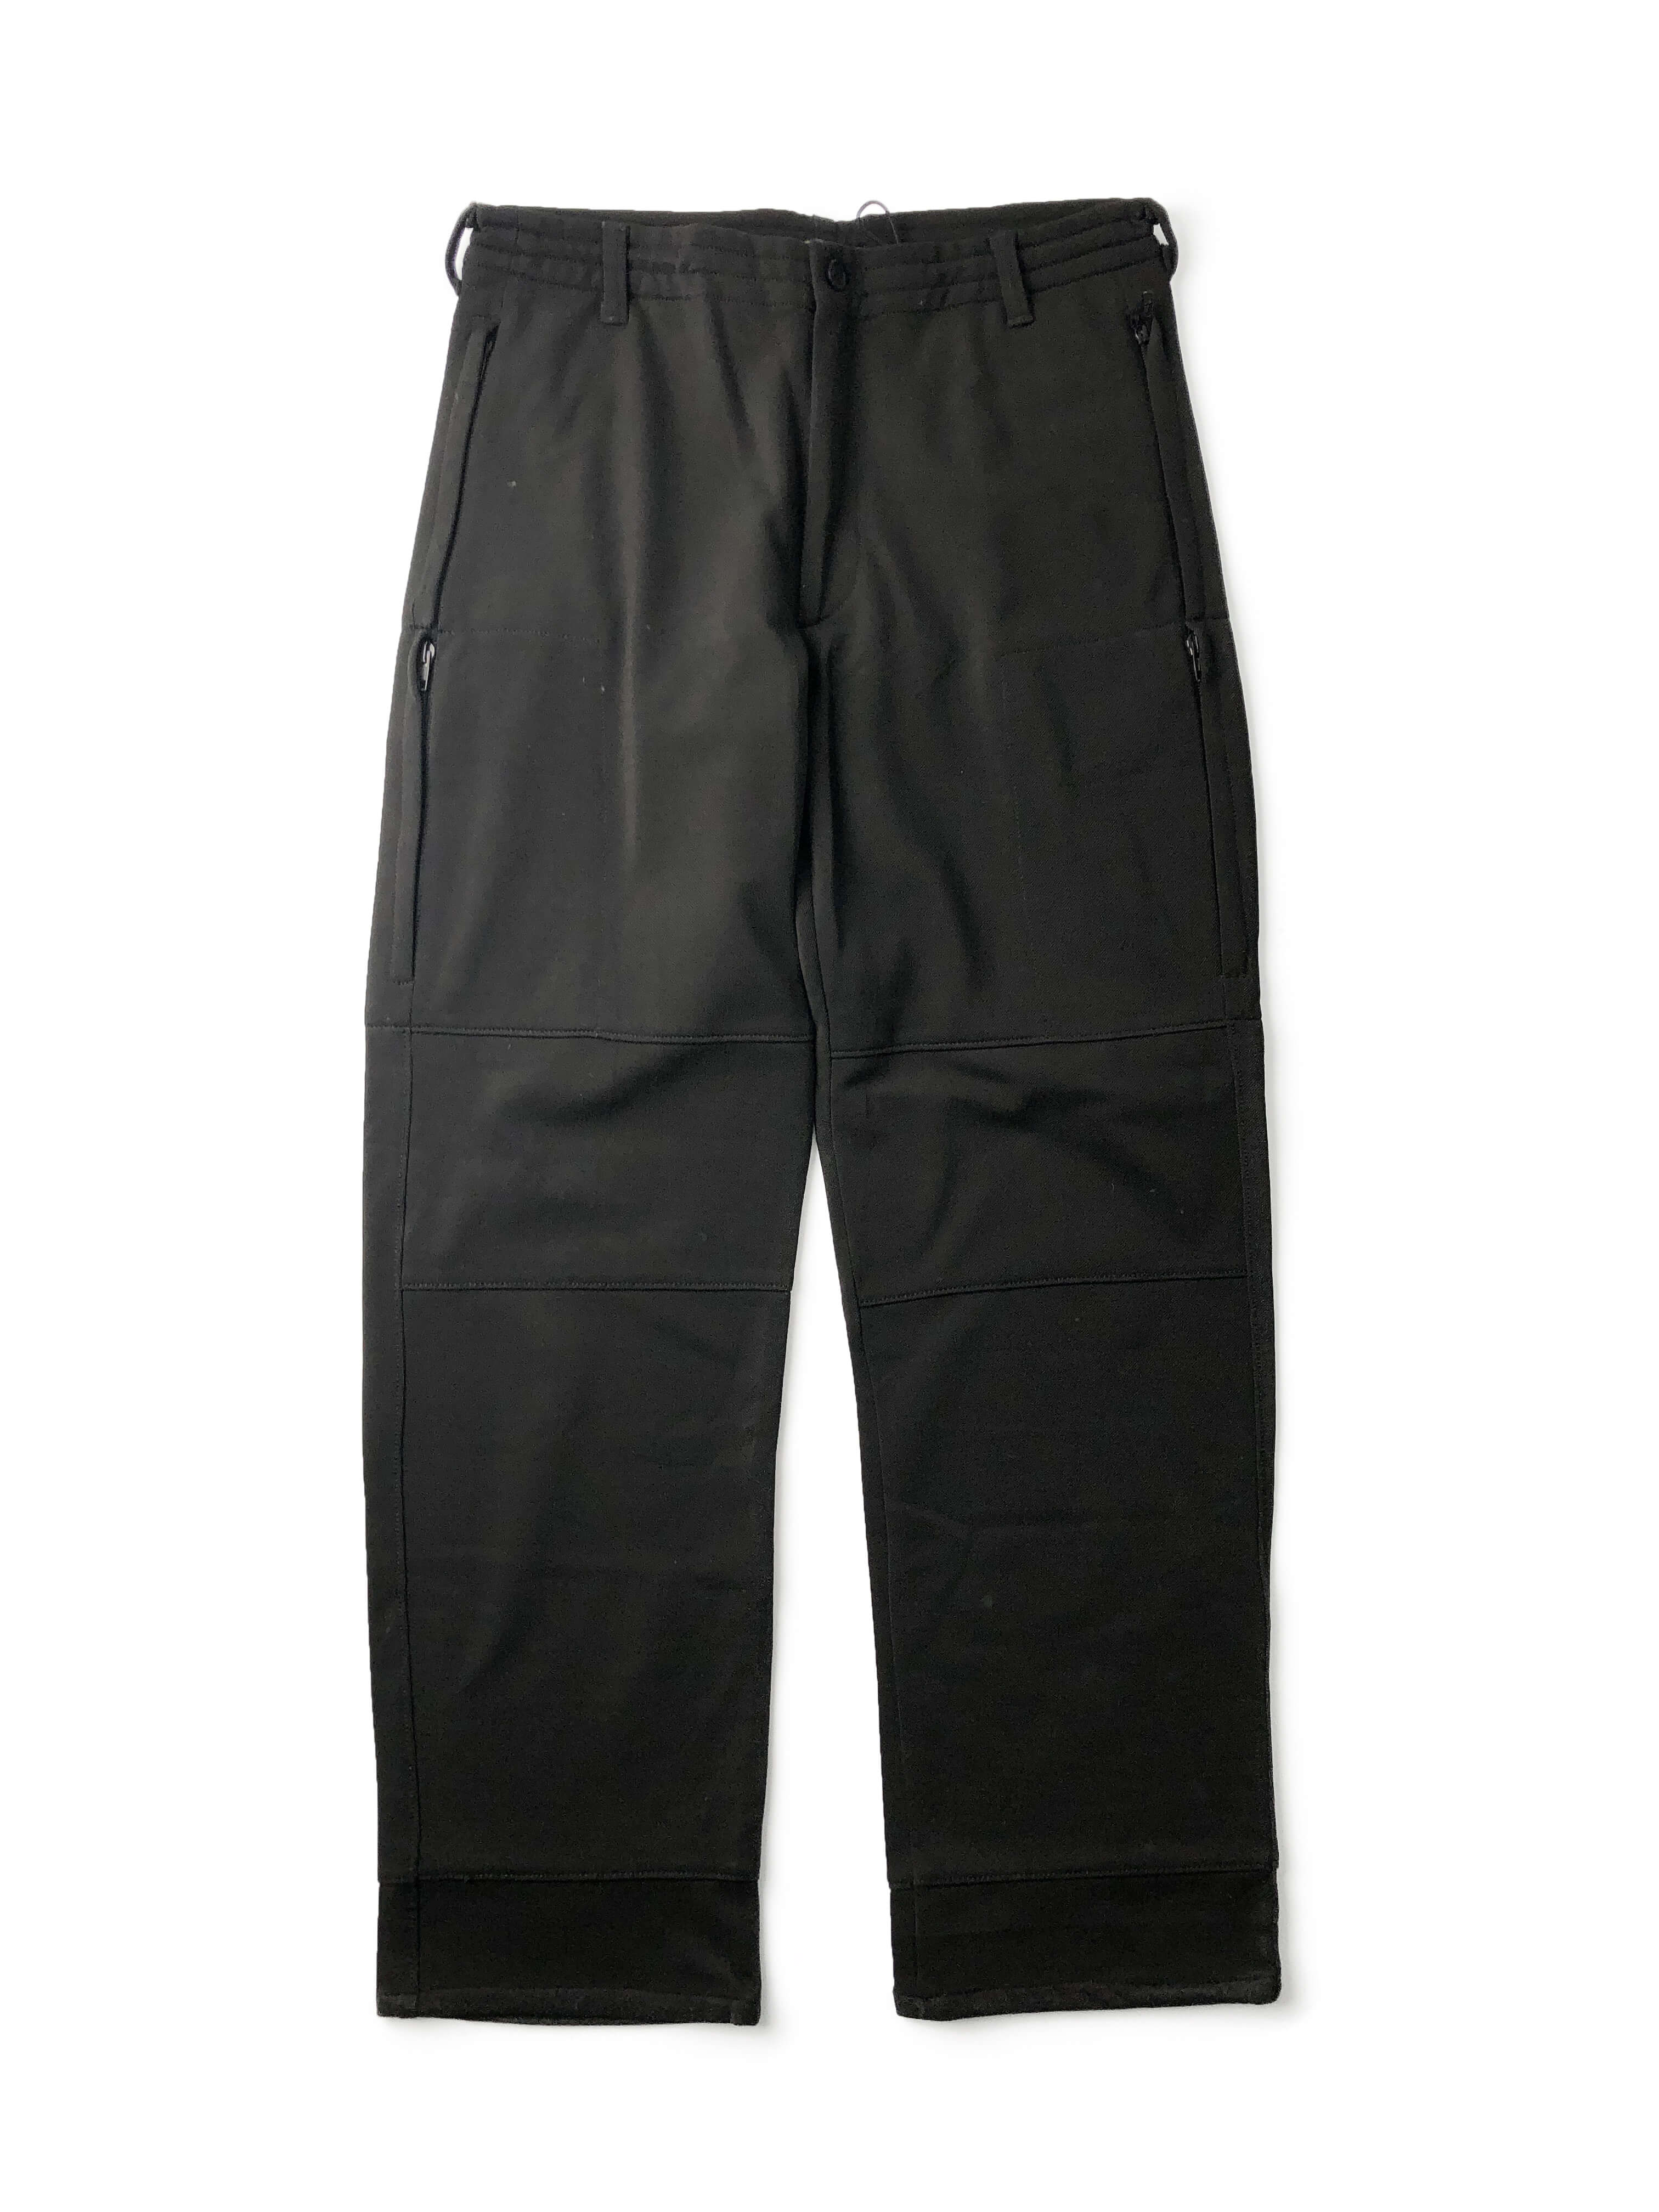 LEFT HAND by Massimo Osti tactical pants